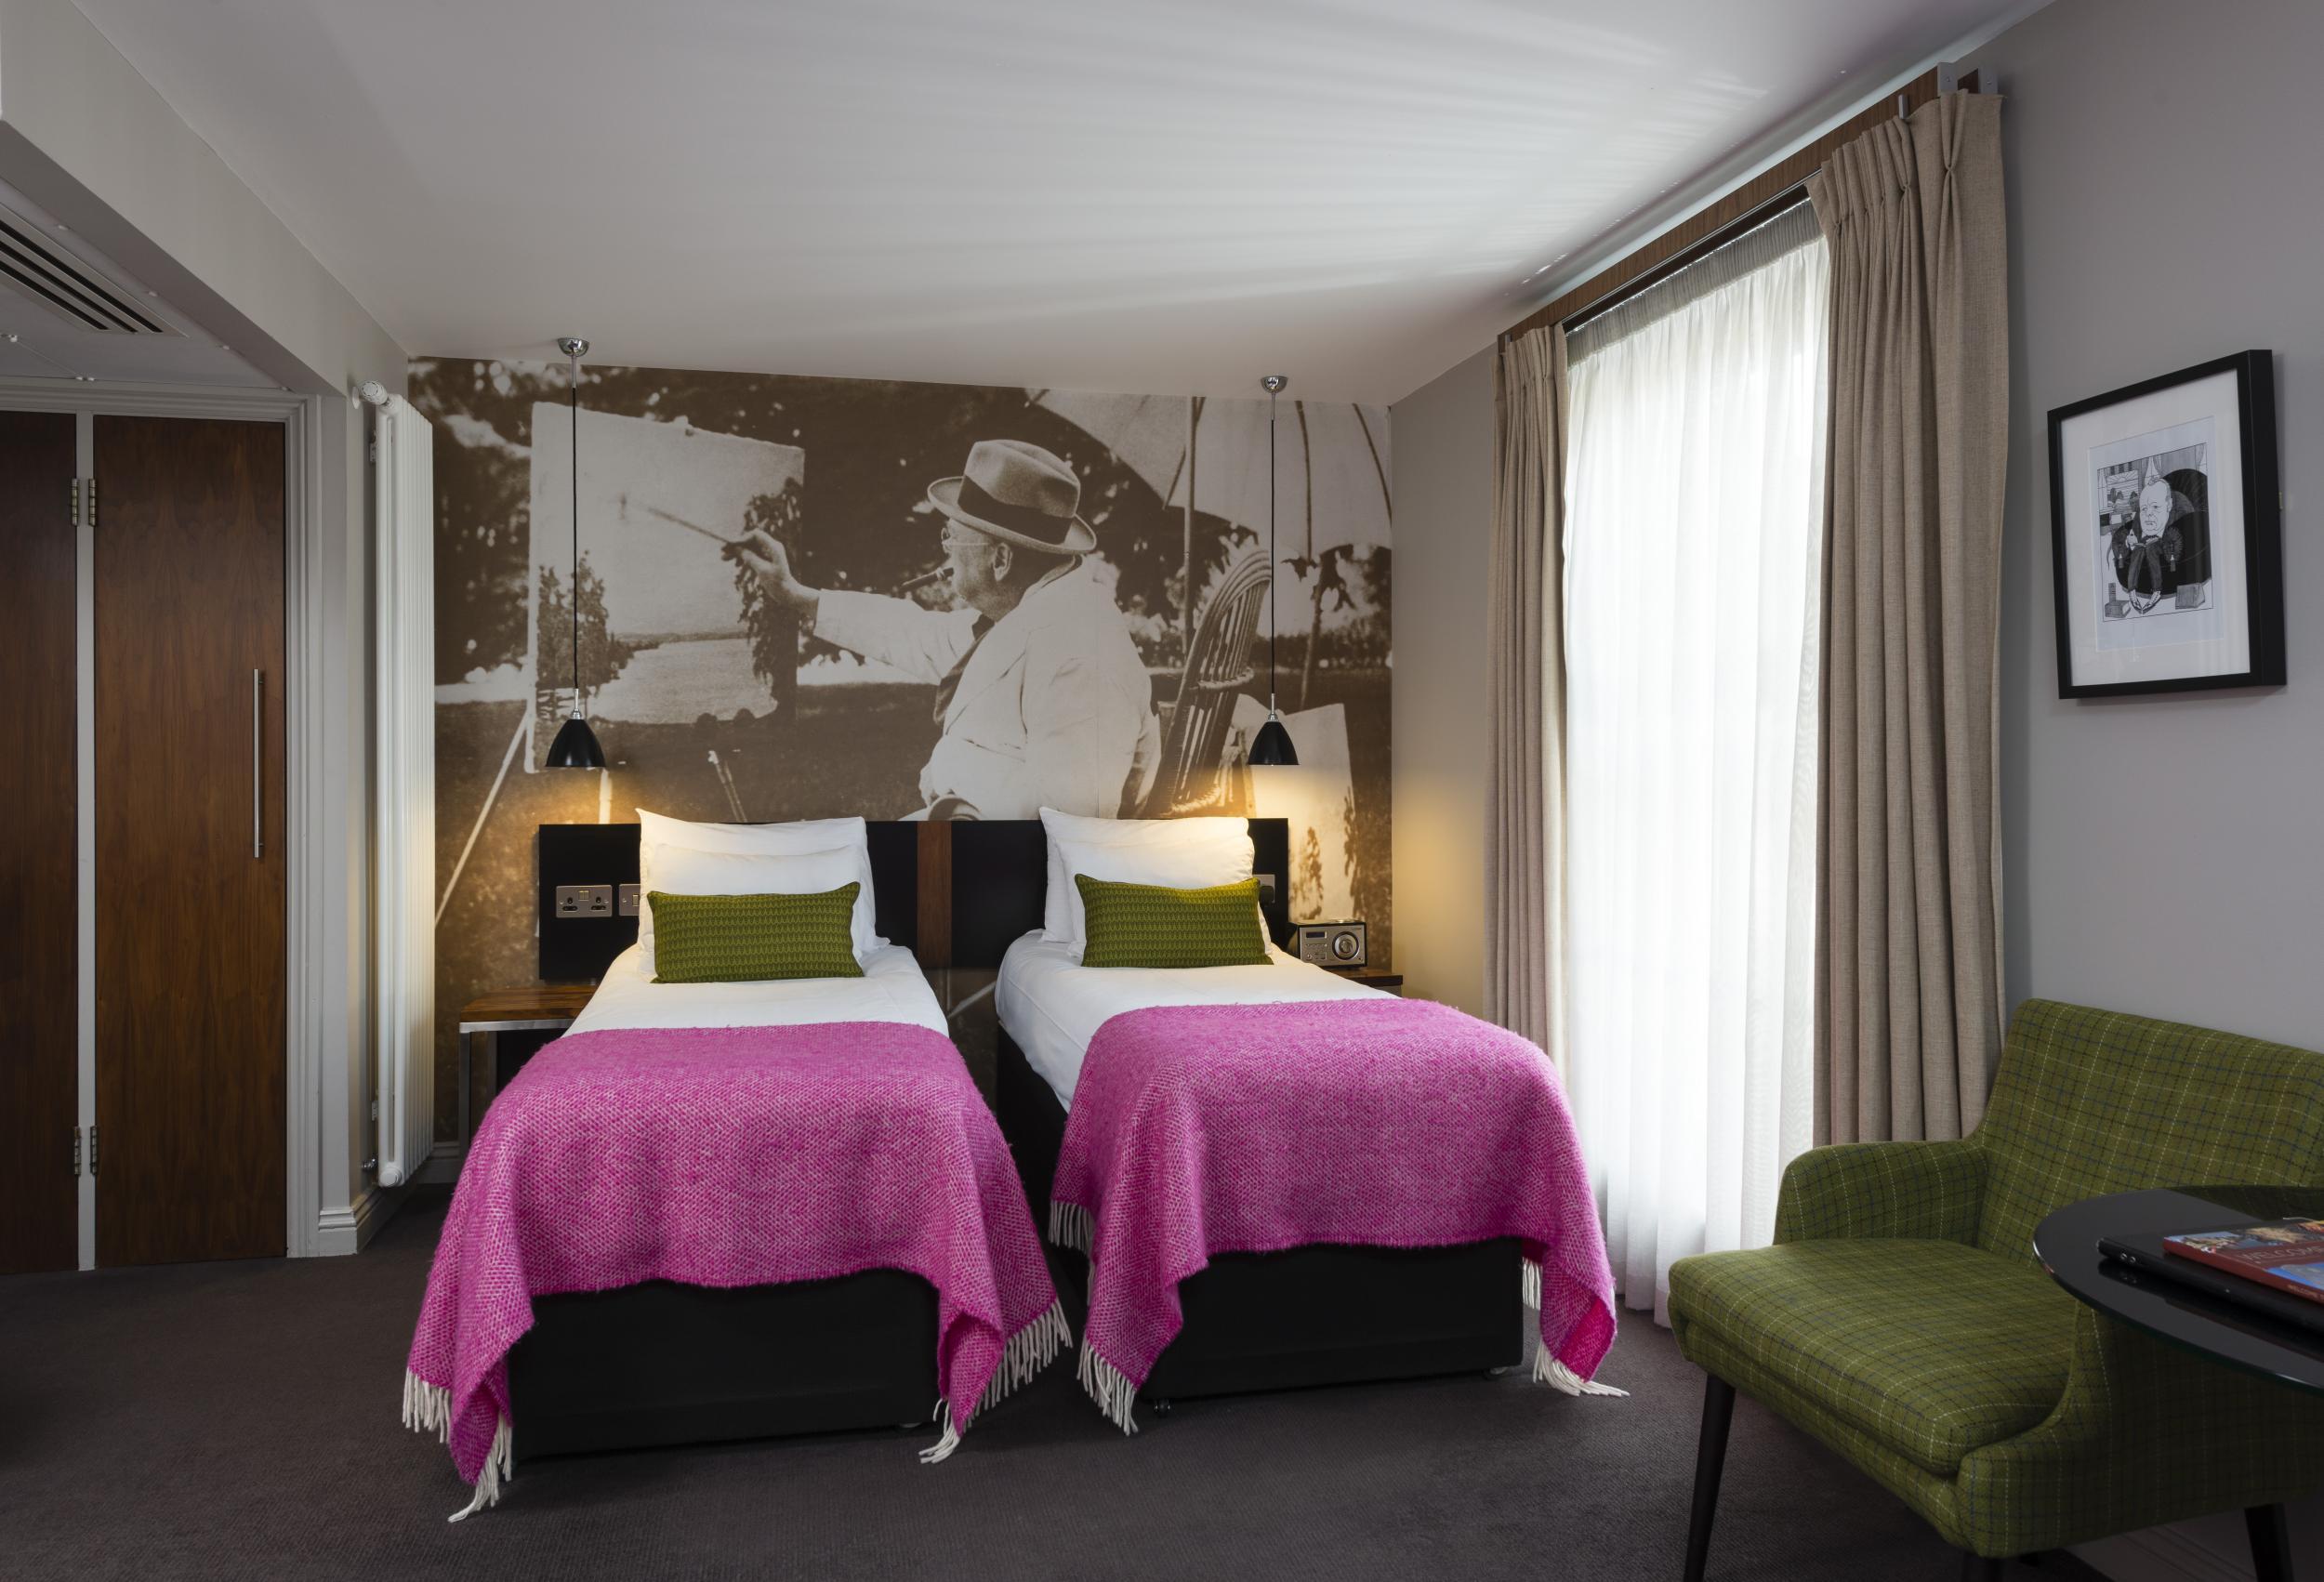 Hot pink bed sheets and a mural of you-know-who (The Churchill Hotel)